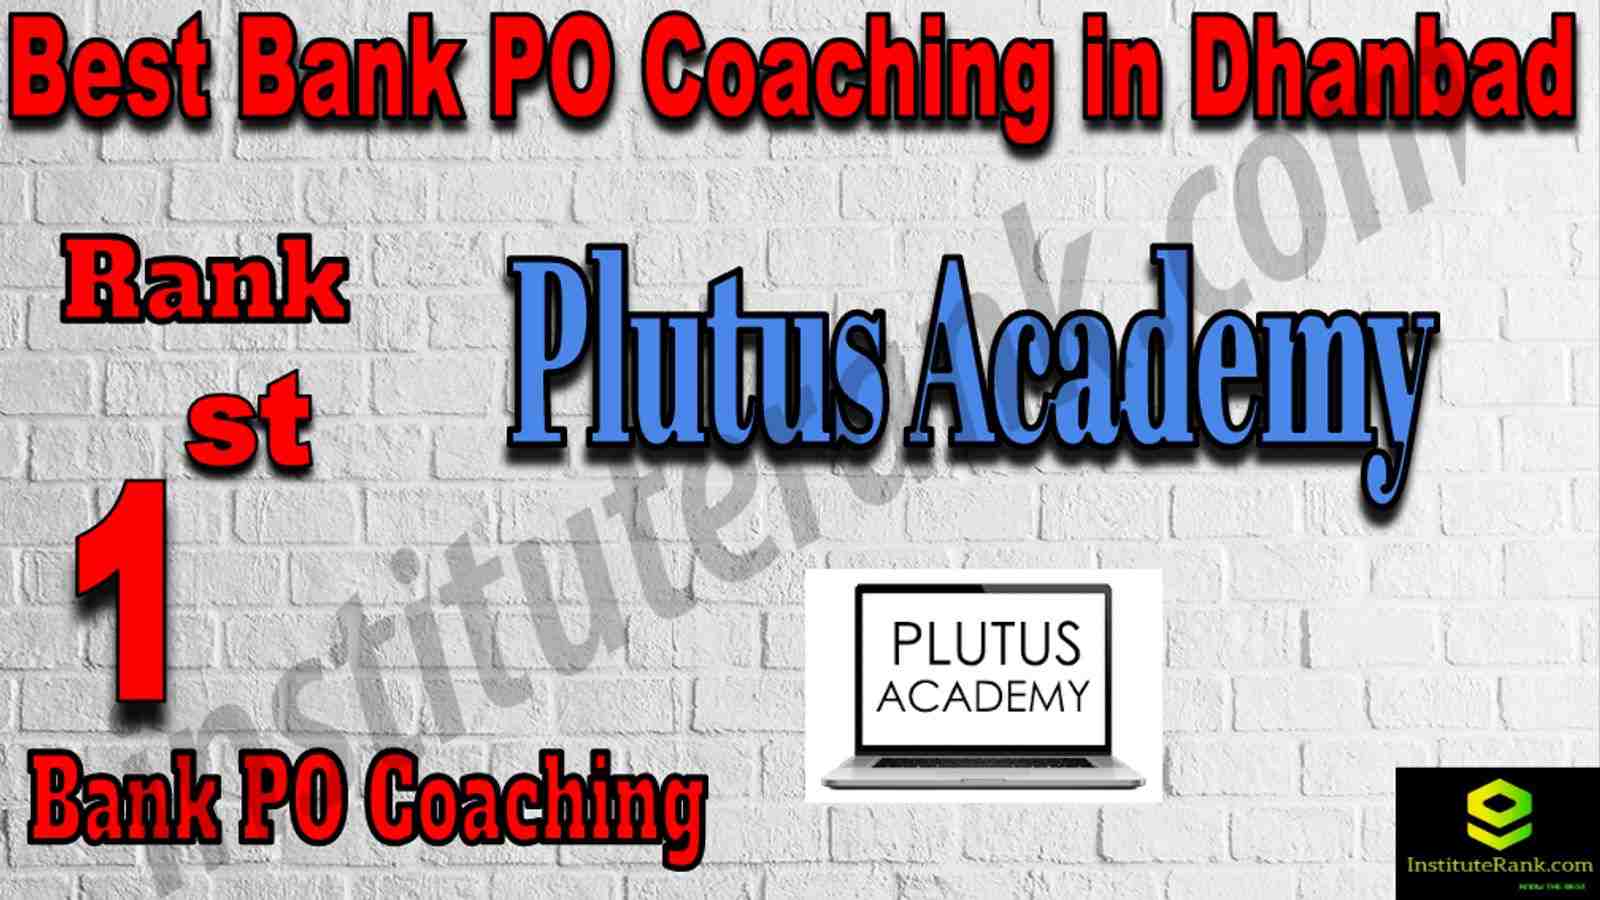 1st Best Bank PO Coaching in Dhanbad